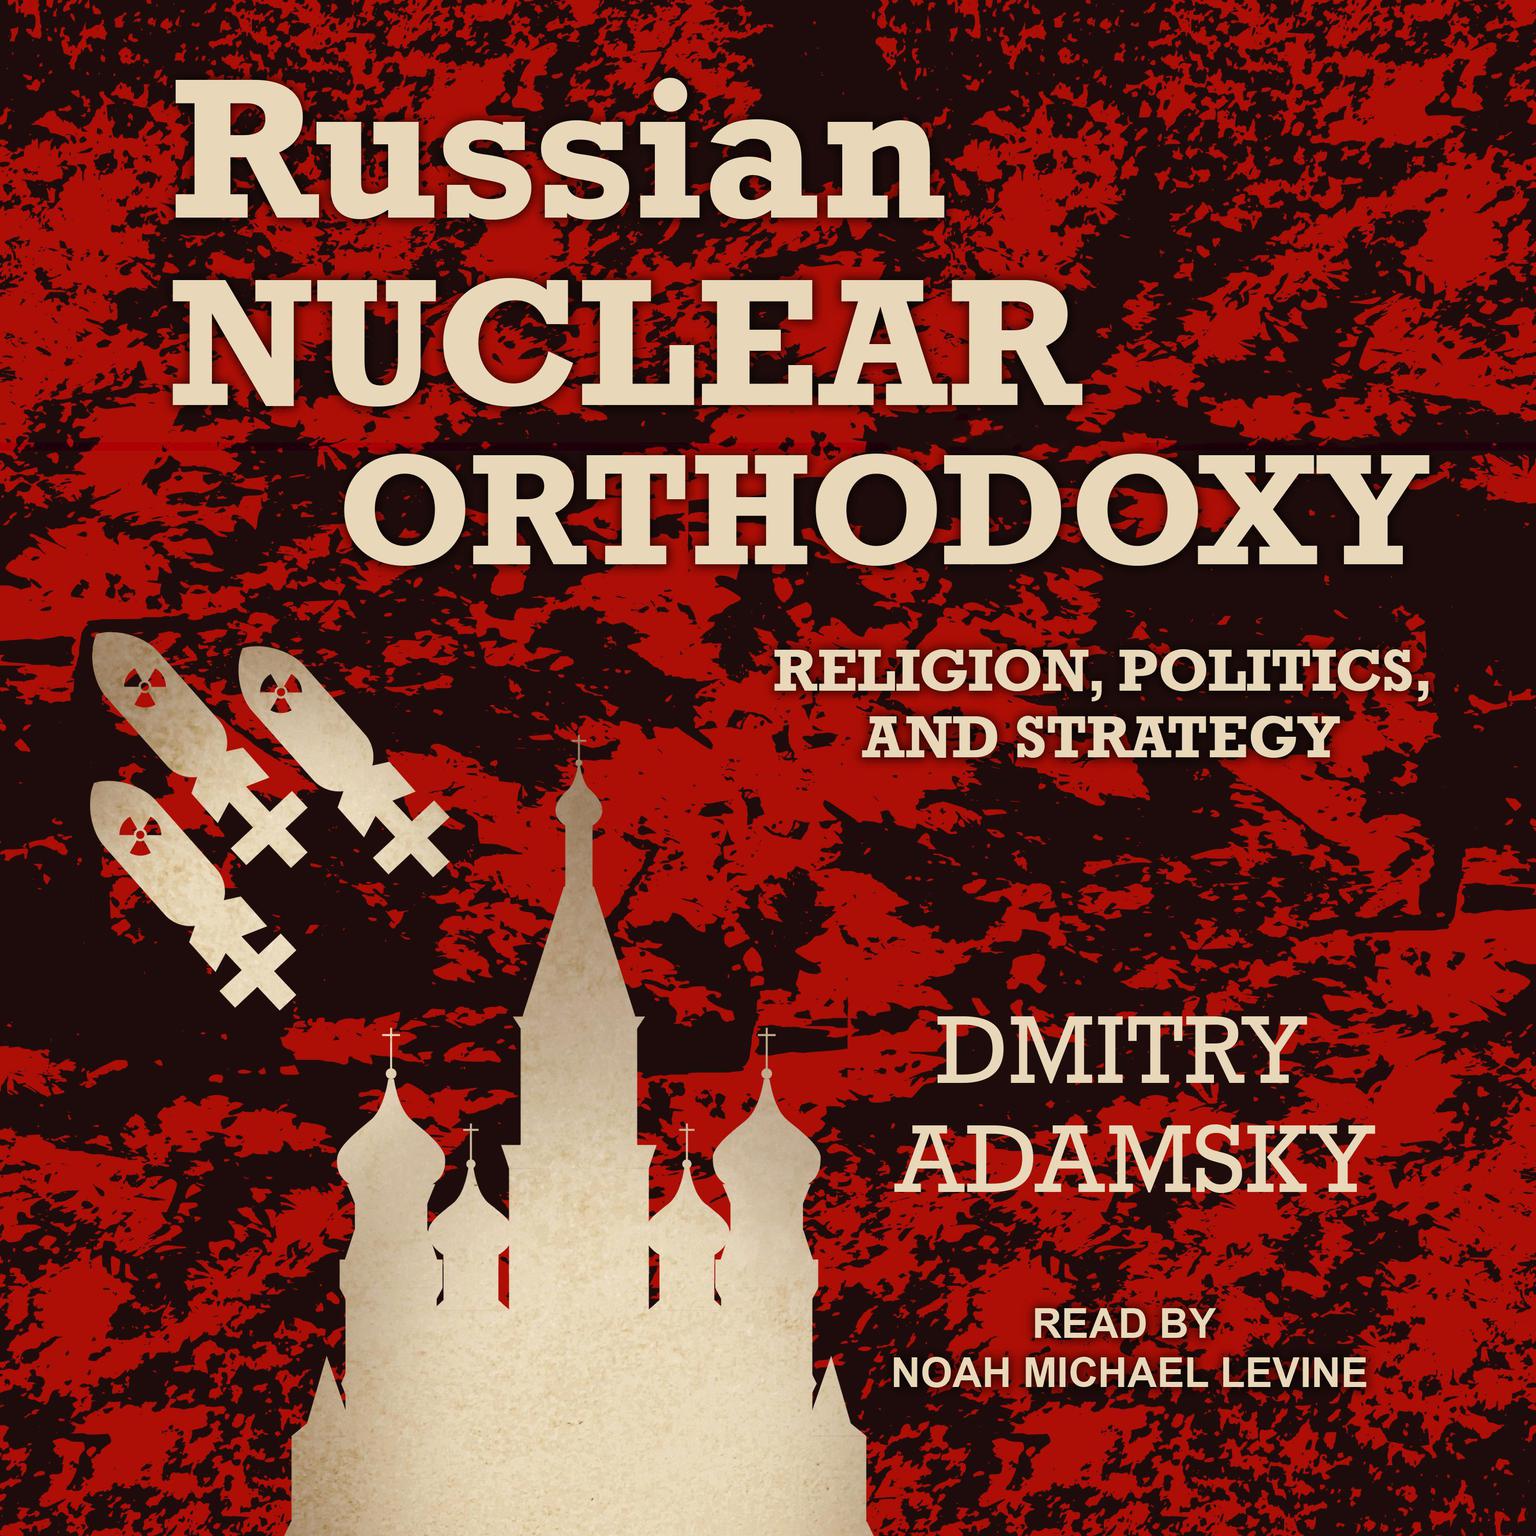 Russian Nuclear Orthodoxy: Religion, Politics, and Strategy Audiobook, by Dmitry Adamsky